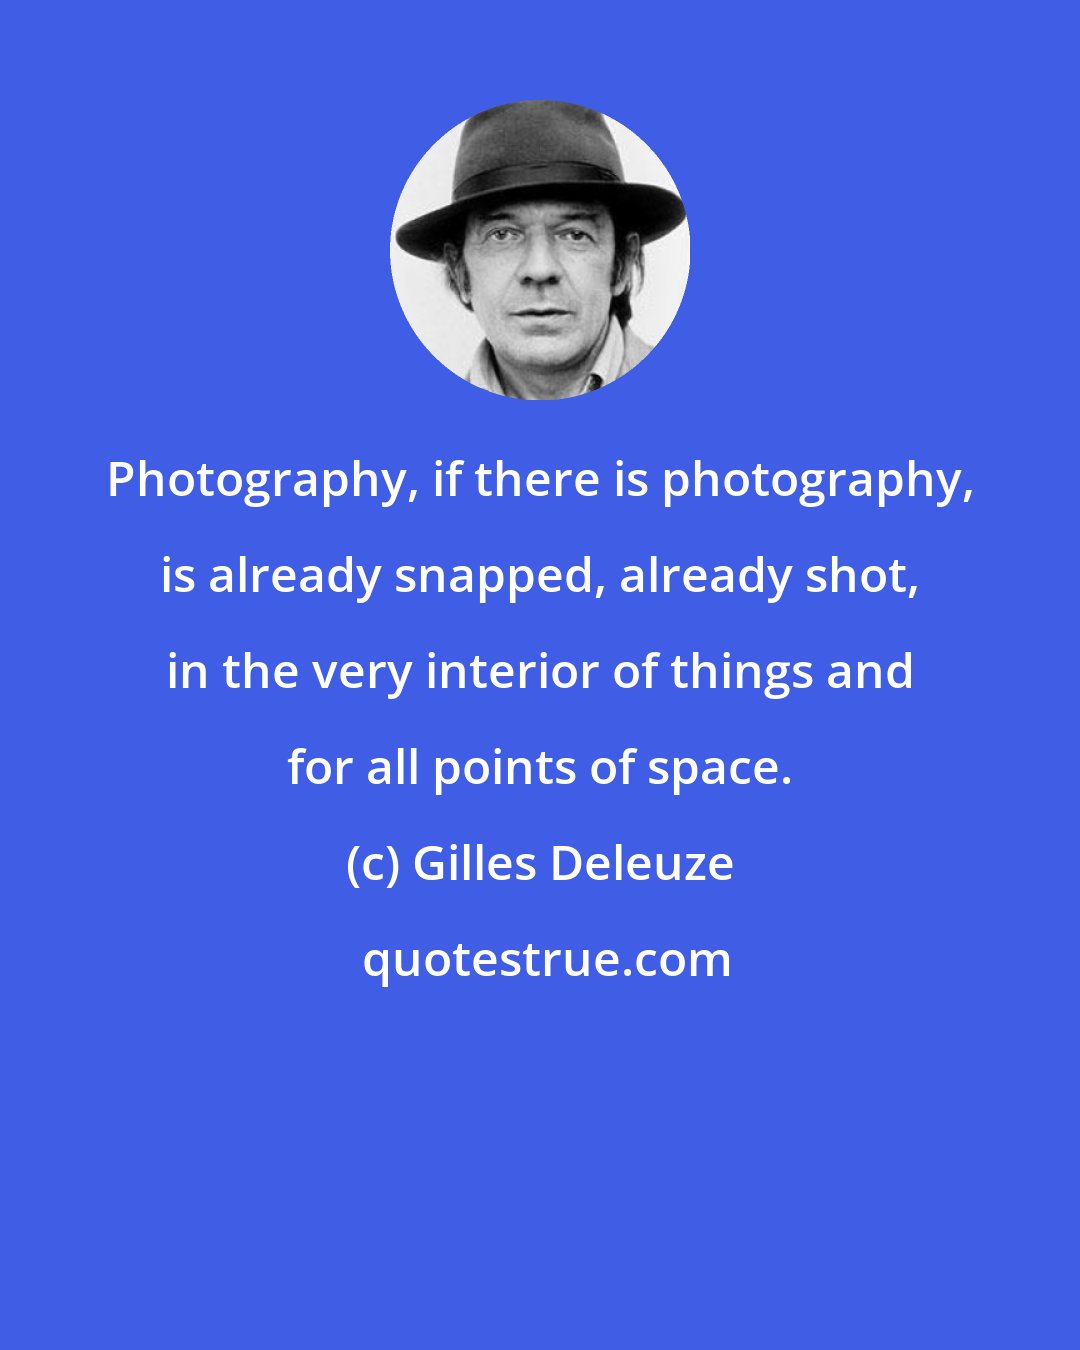 Gilles Deleuze: Photography, if there is photography, is already snapped, already shot, in the very interior of things and for all points of space.